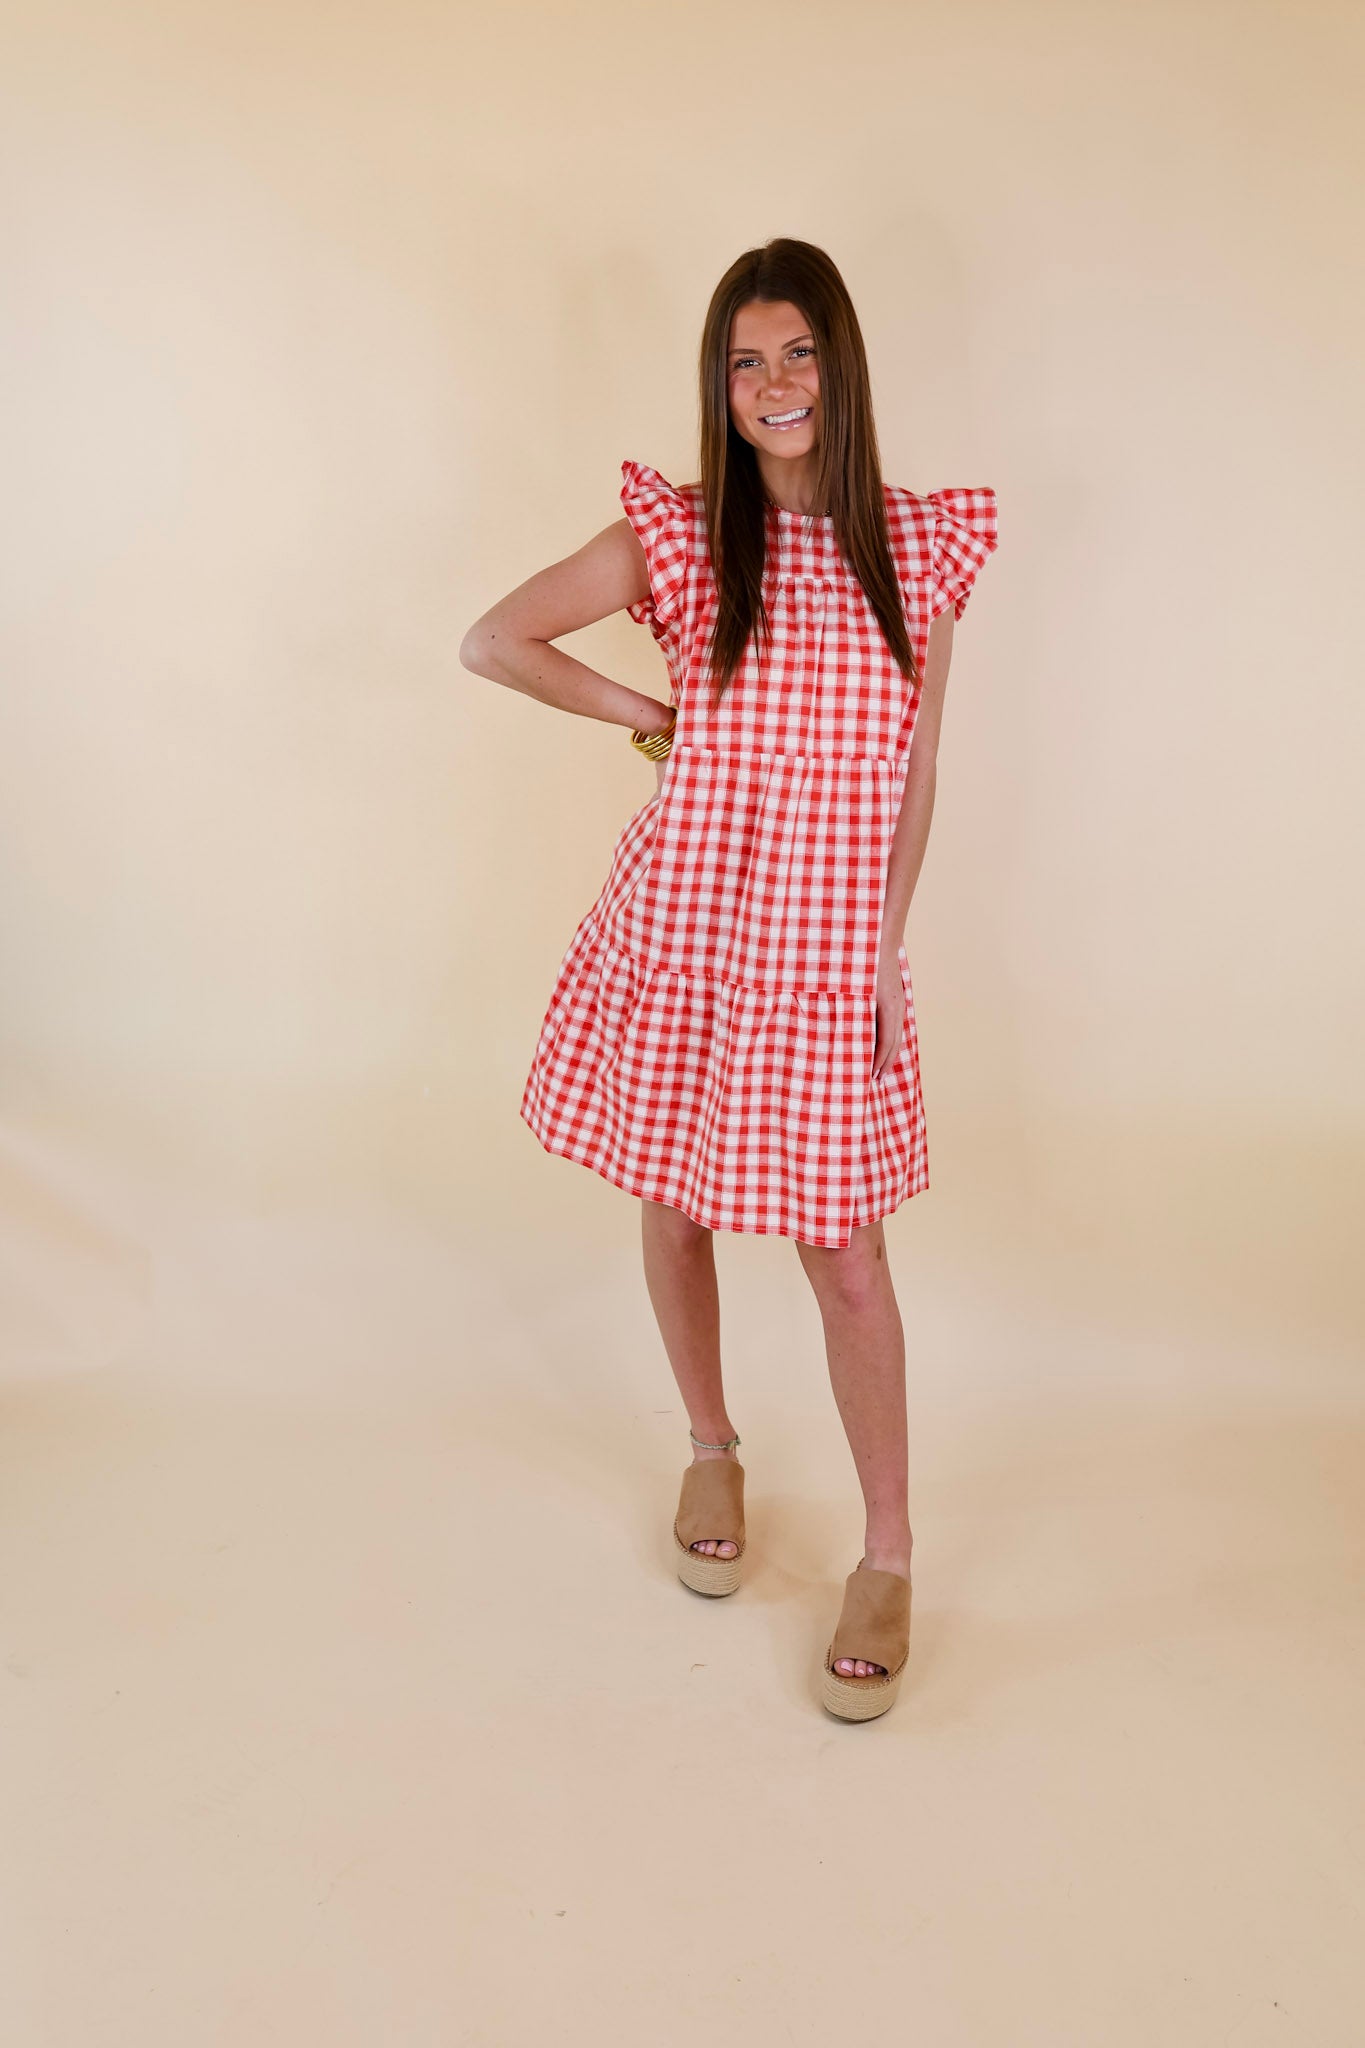 Sunny Pier Gingham Dress with Ruffle Cap Sleeves in Coral Red and White - Giddy Up Glamour Boutique